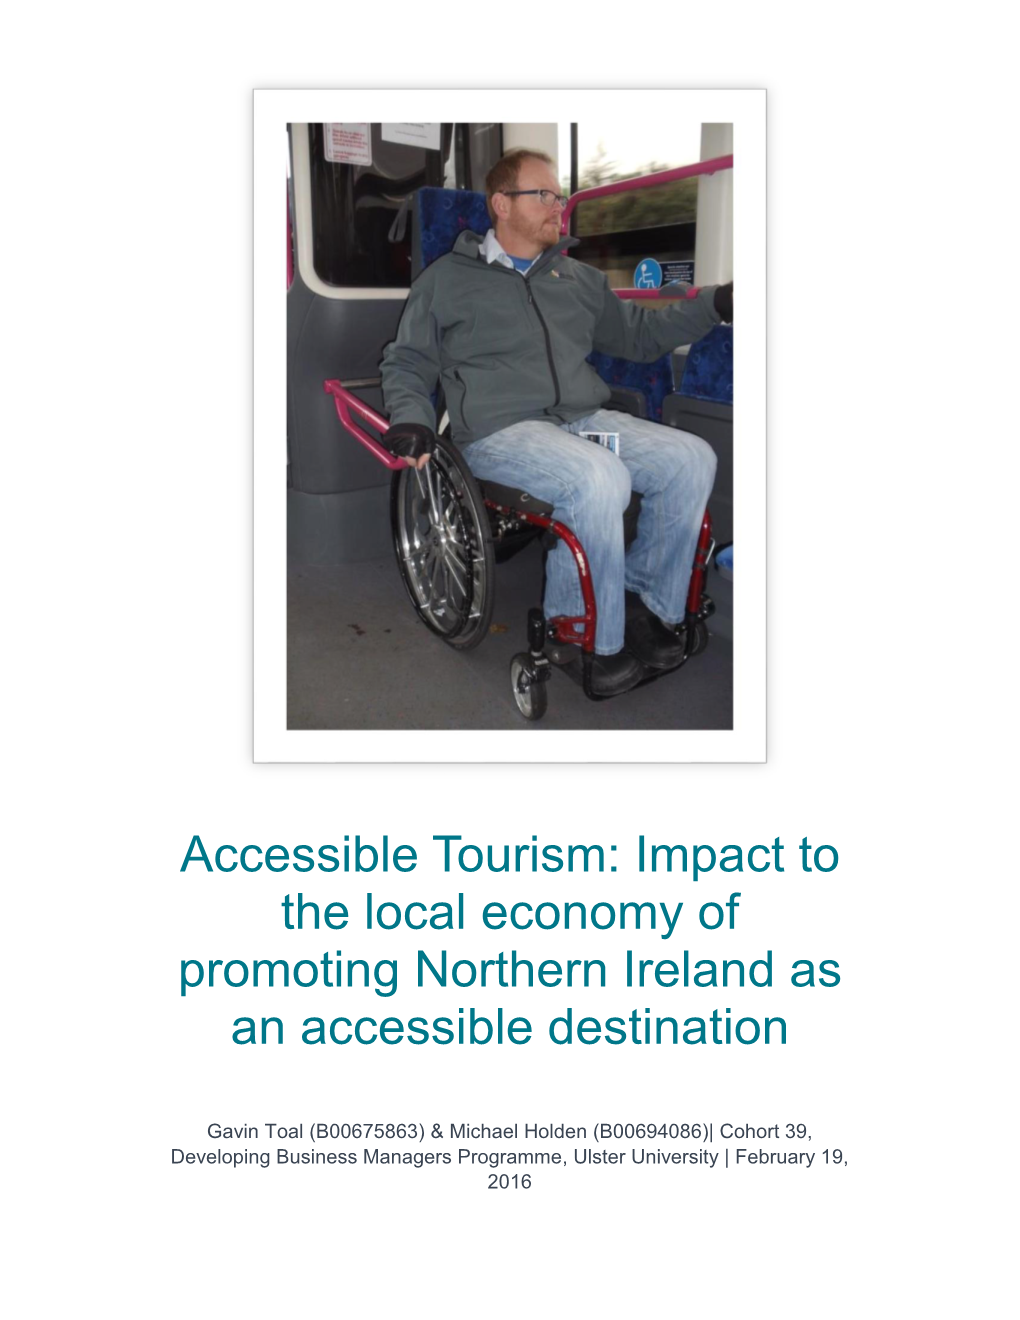 Accessible Tourism: Impact to the Local Economy of Promoting Northern Ireland As an Accessible Destination